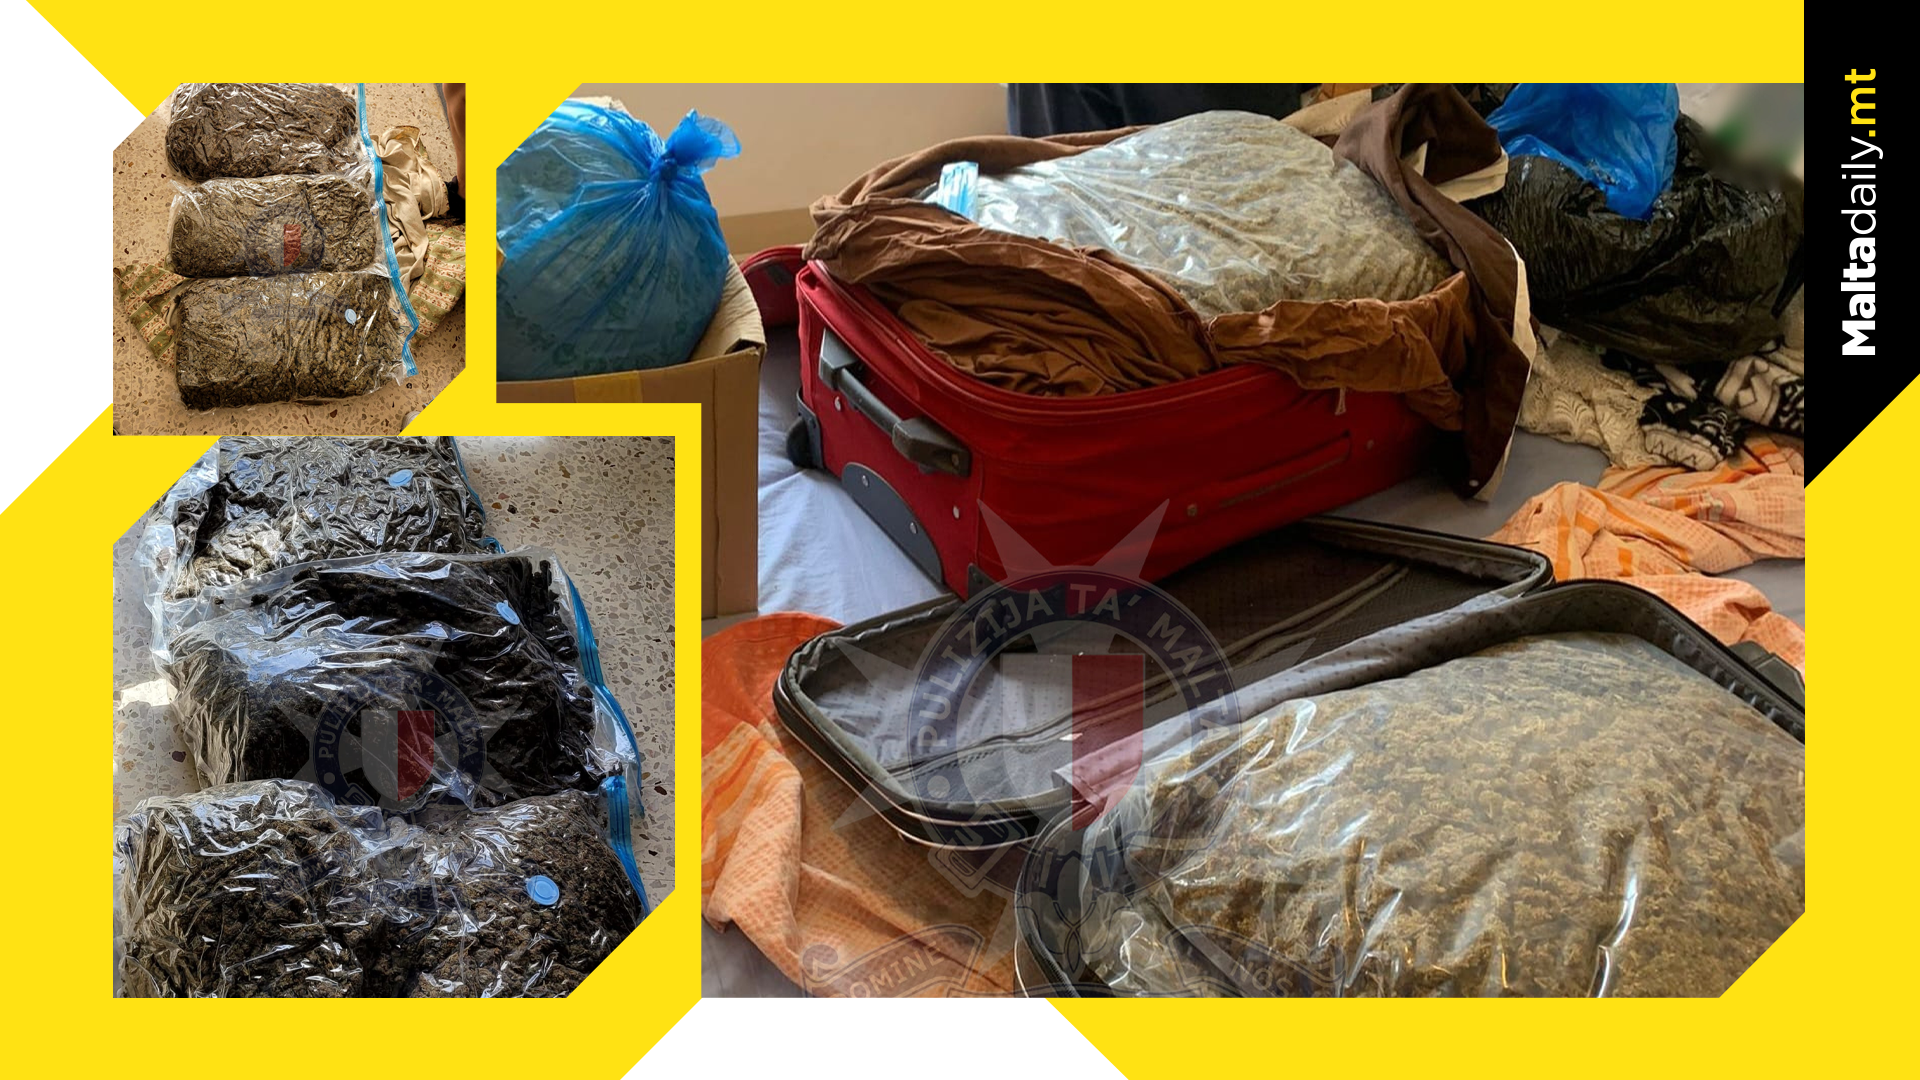 54kg of Suspected Cannabis Seized